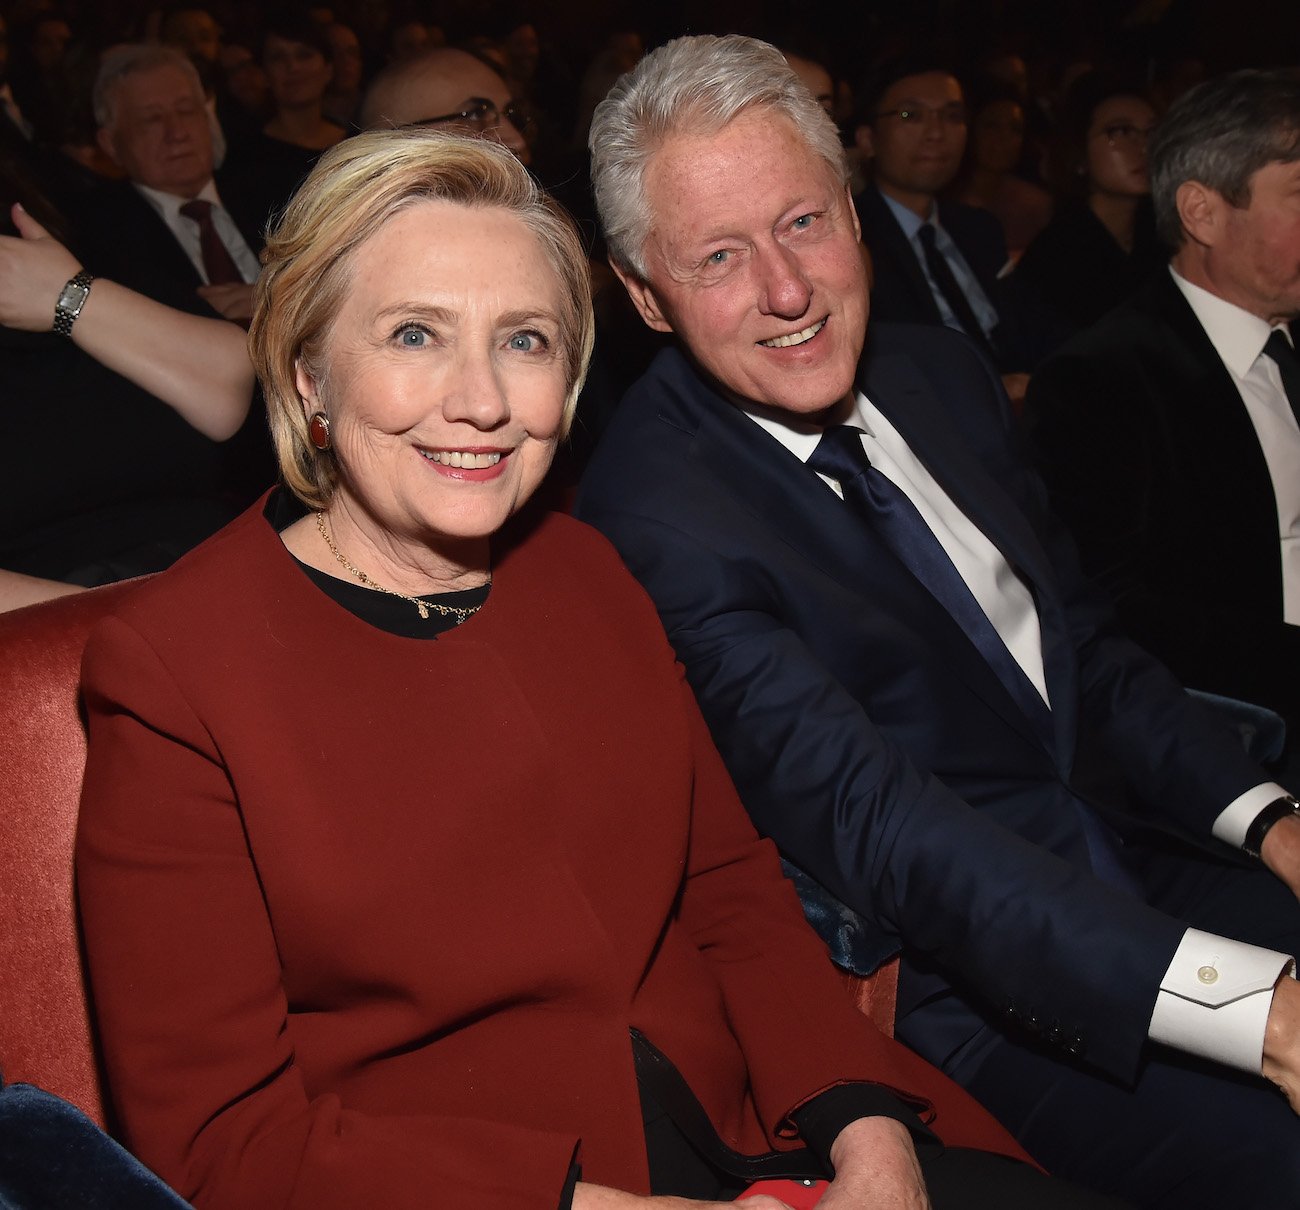 Hillary Clinton and Bill Clinton smile as they sit together at the 2018 Grammy Awards